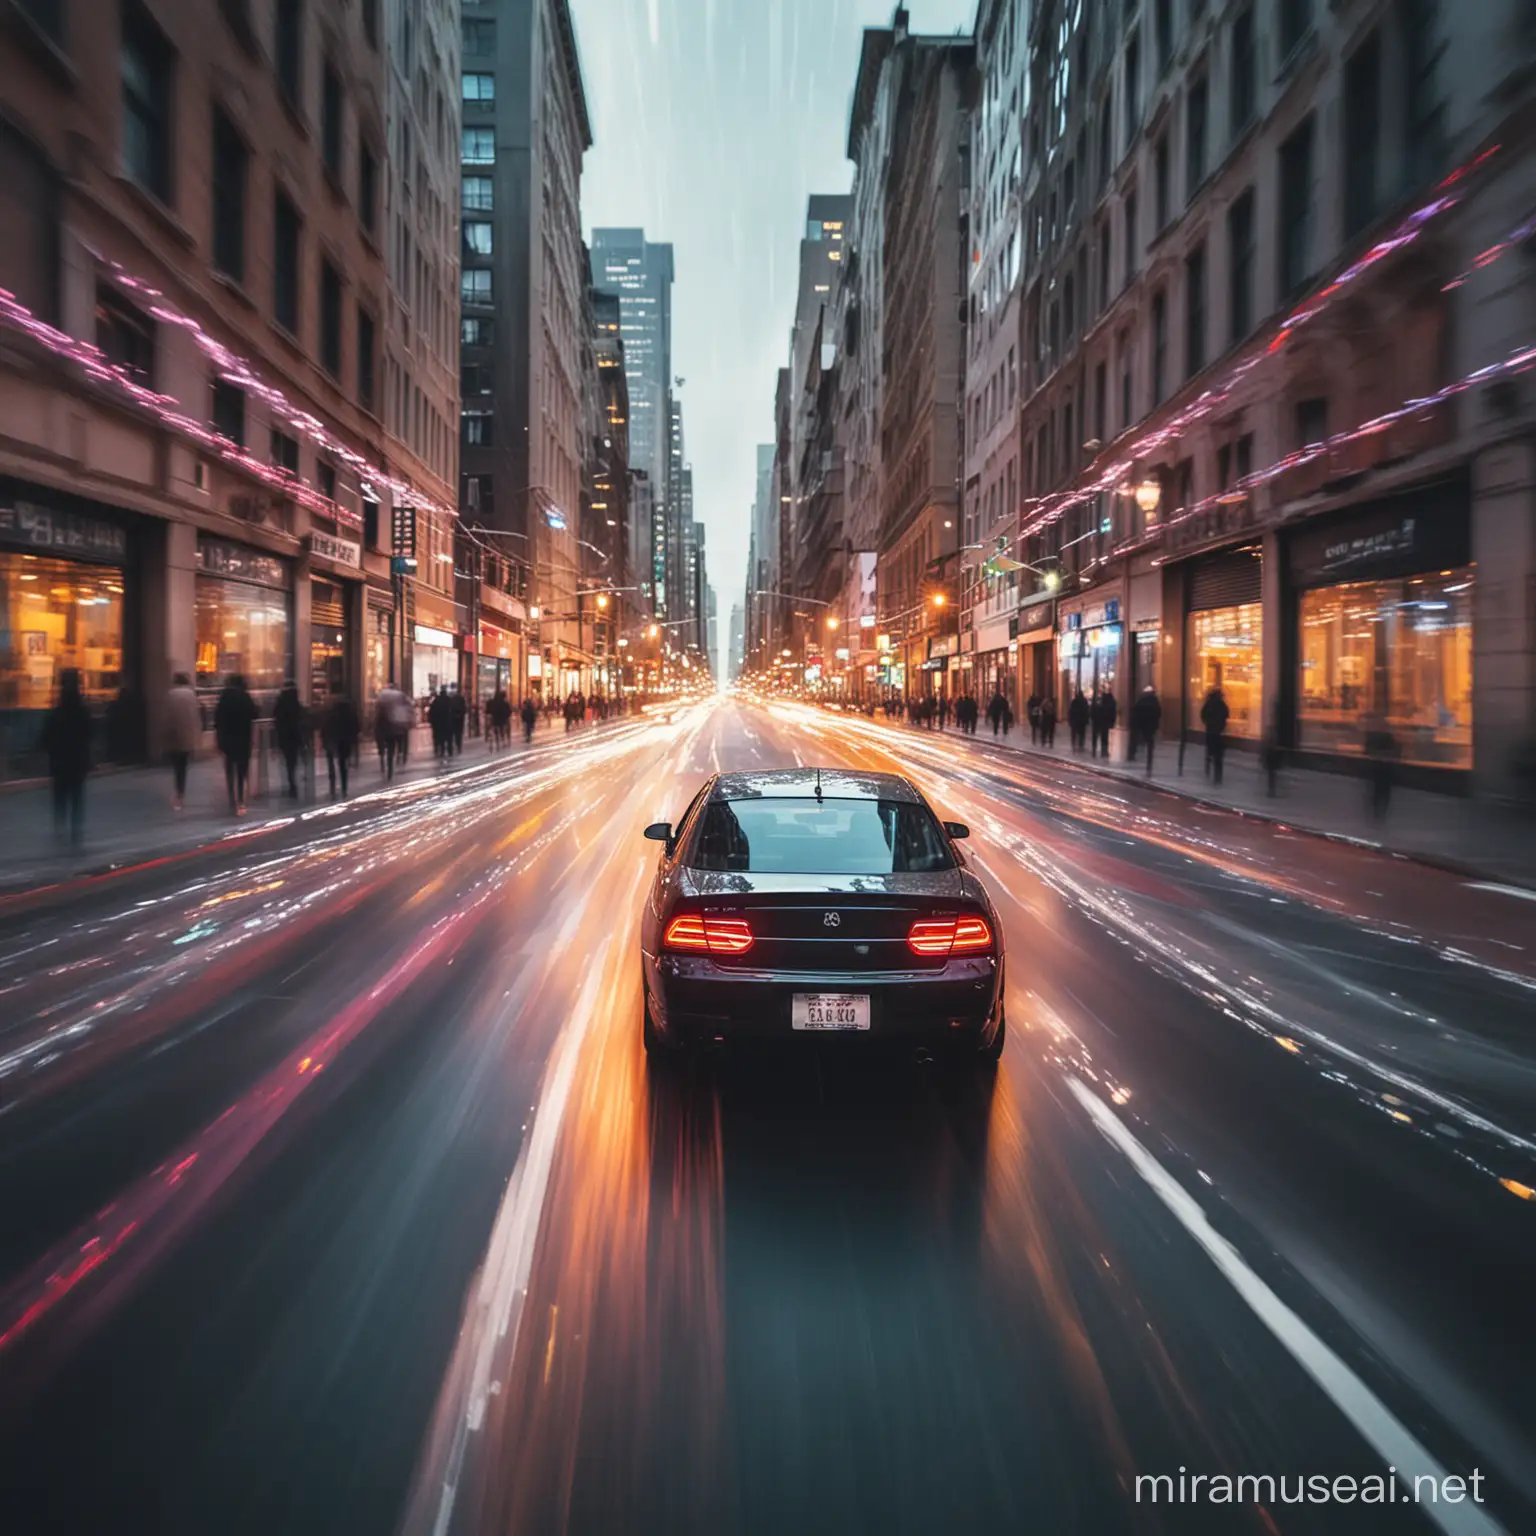 Fear of speed,The image shows a car driving through a city with elements of light, colorfulness, abstractness, blur, and art.